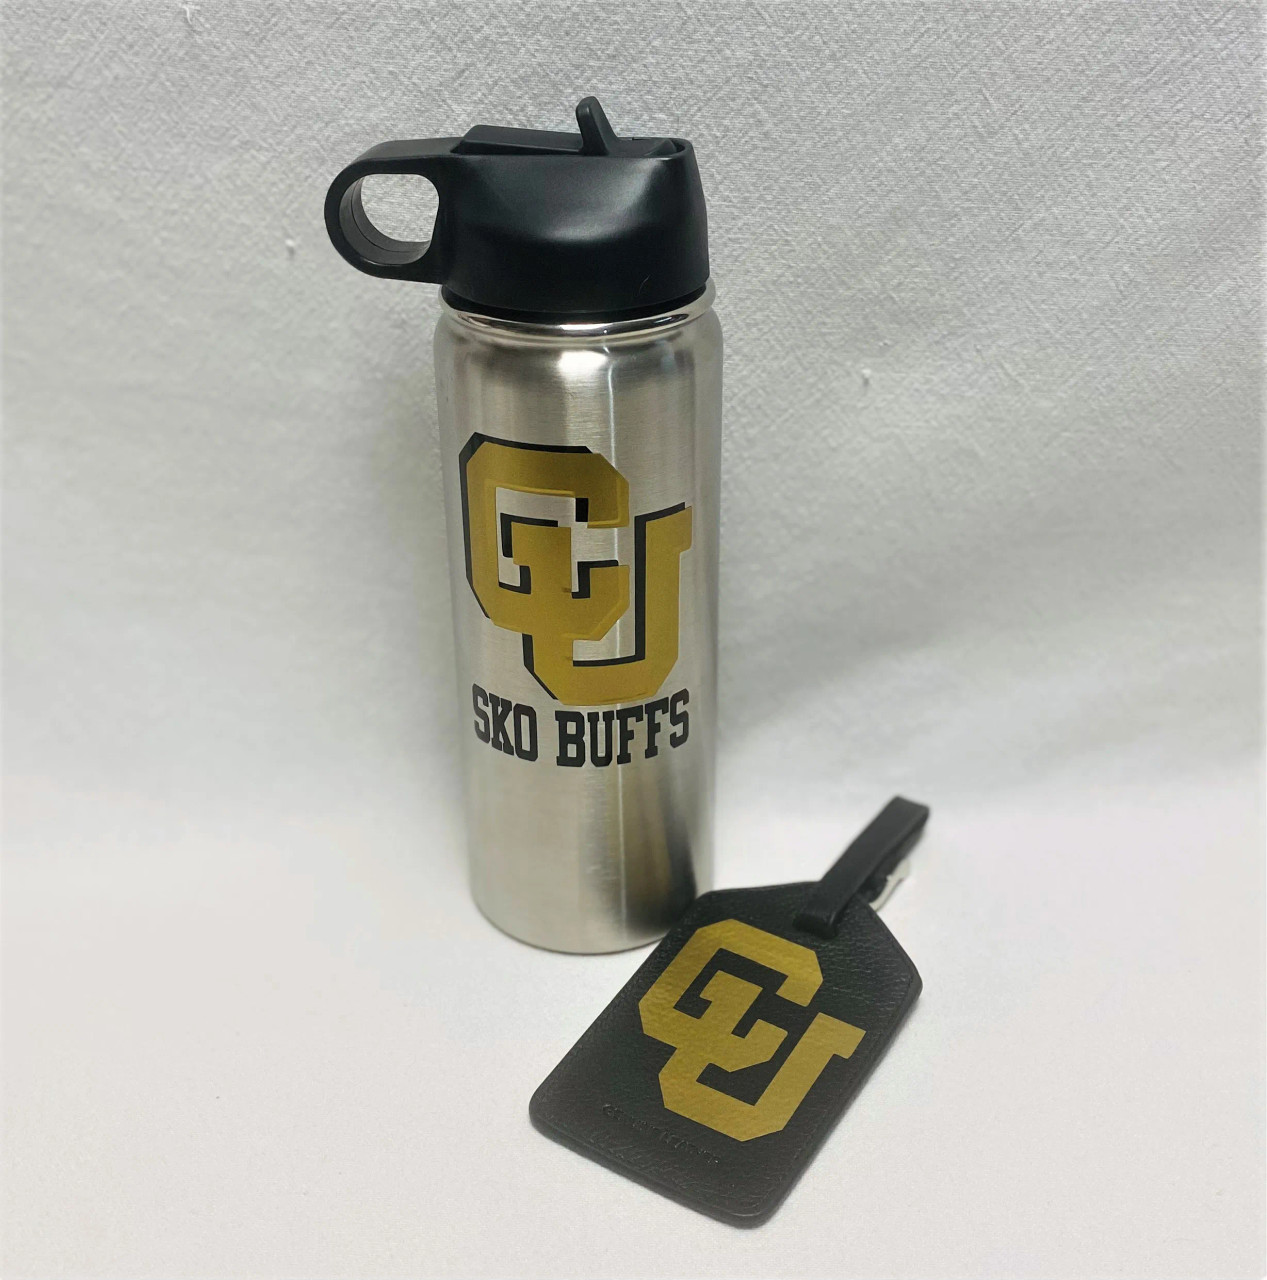 Customized & Personalized Gray Water Bottles